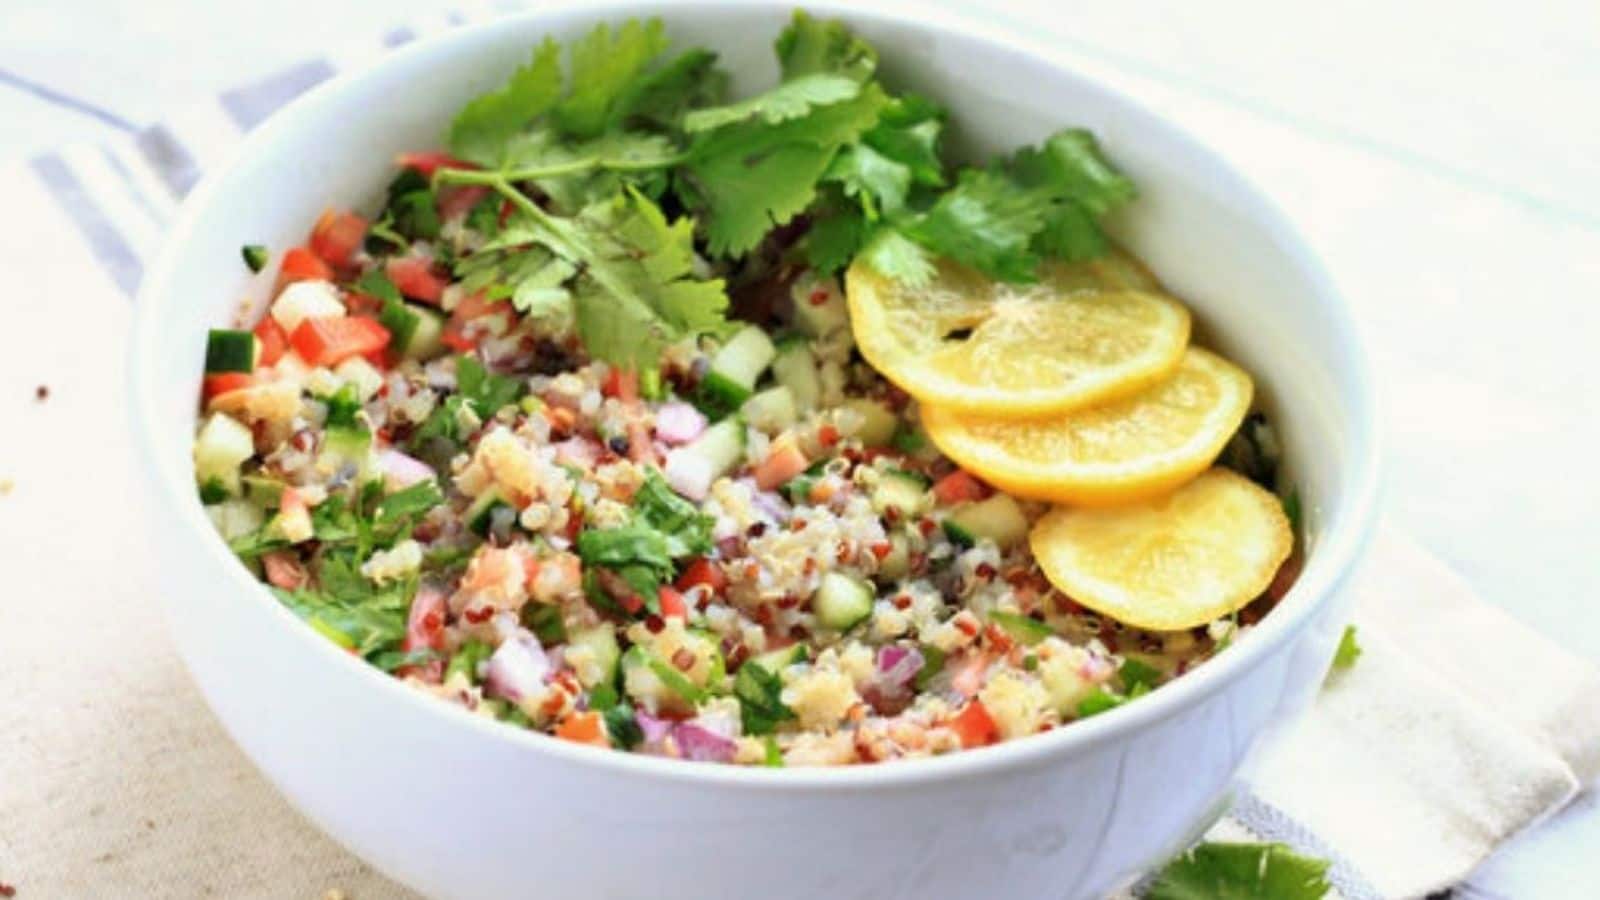 Try this vegan ceviche recipe for a flavorsome day